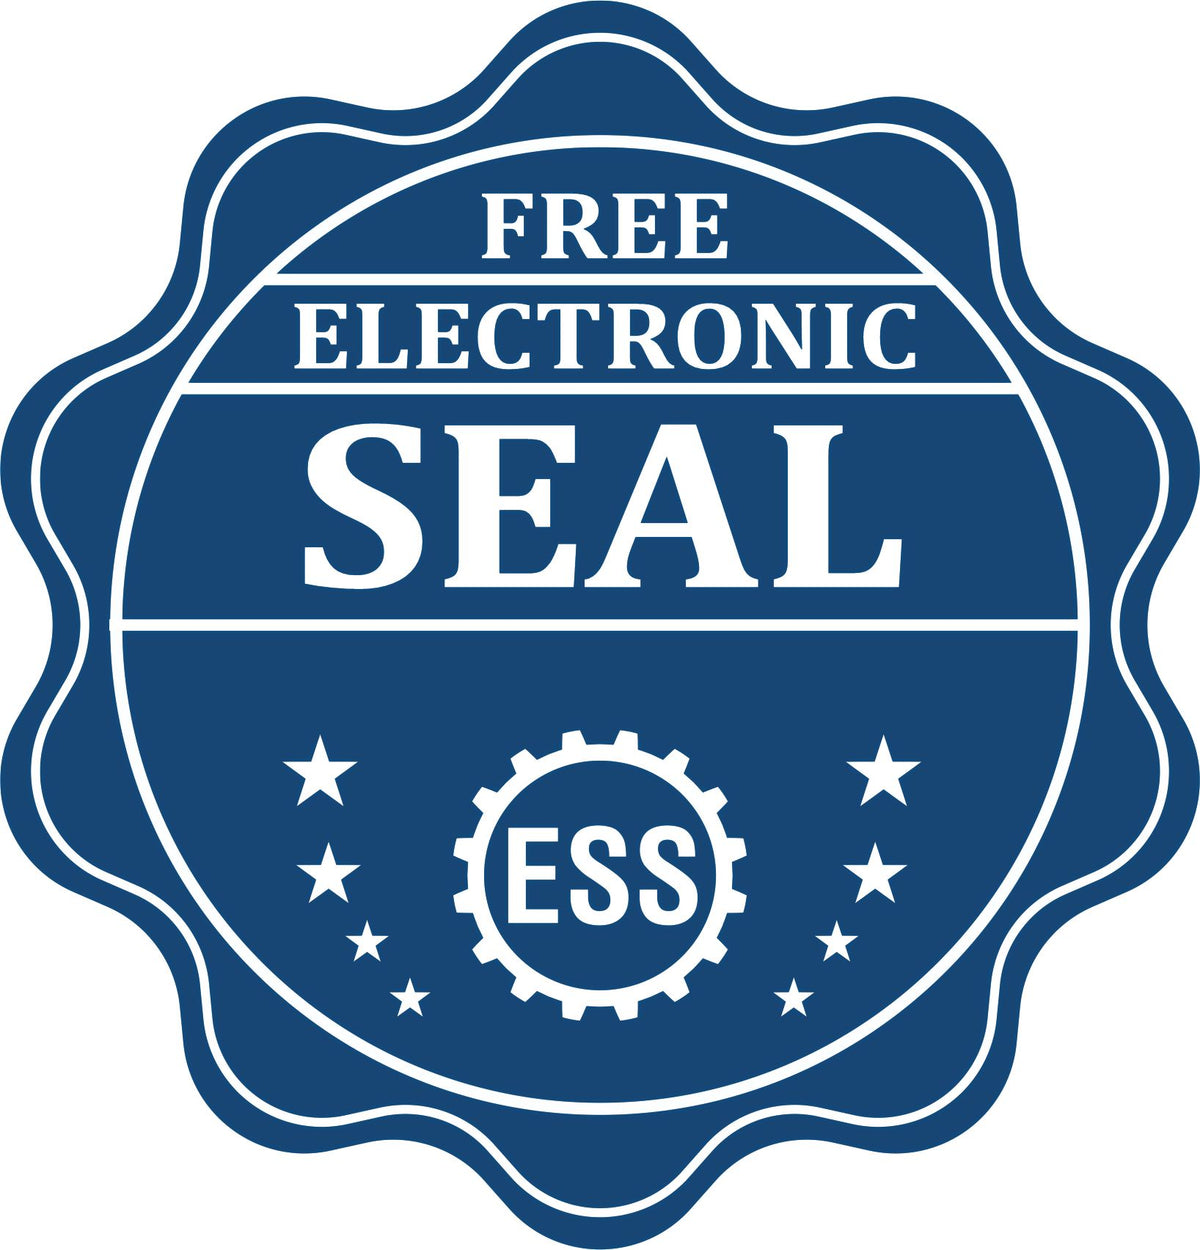 A badge showing a free electronic seal for the State of Pennsylvania Extended Long Reach Engineer Seal with stars and the ESS gear on the emblem.